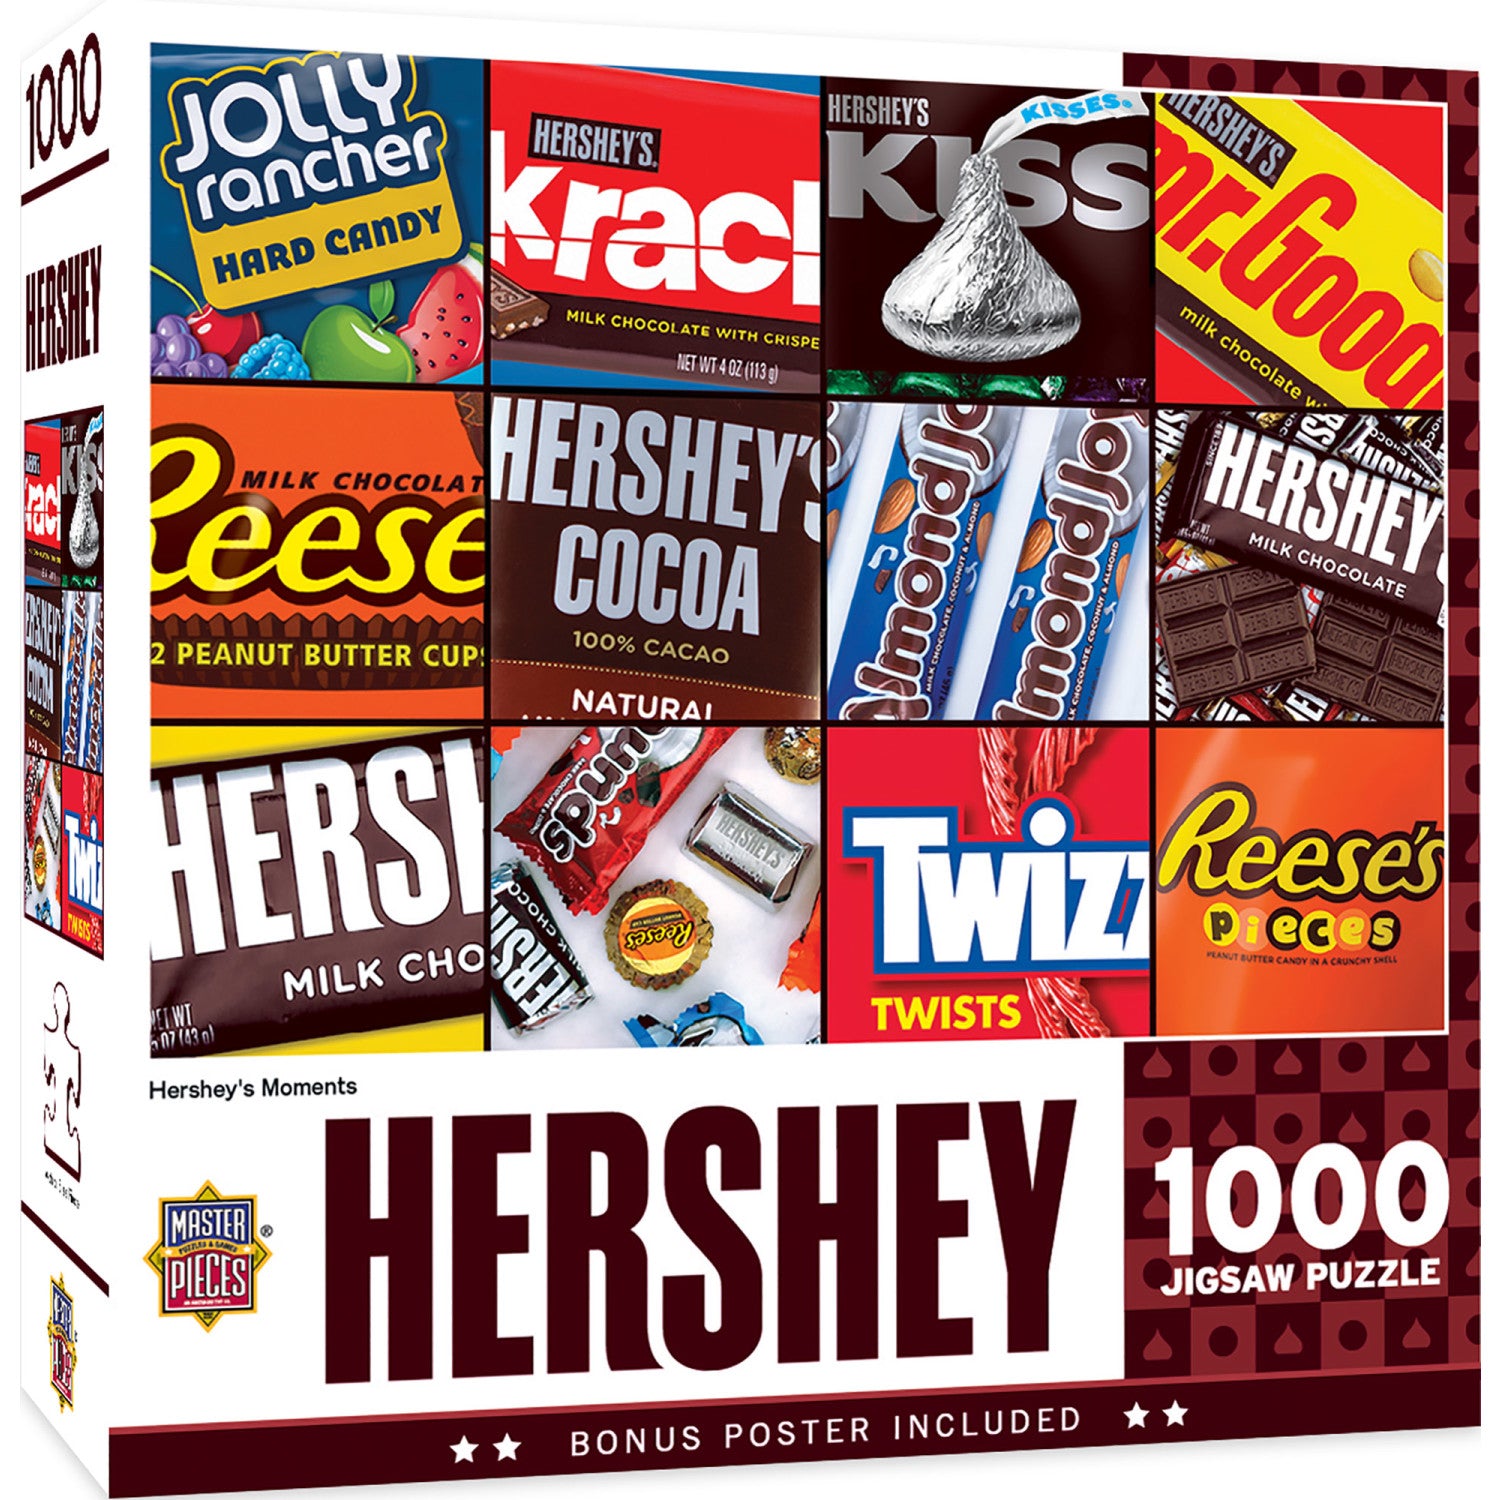 Hershey's - Moments 1000 Piece Puzzle